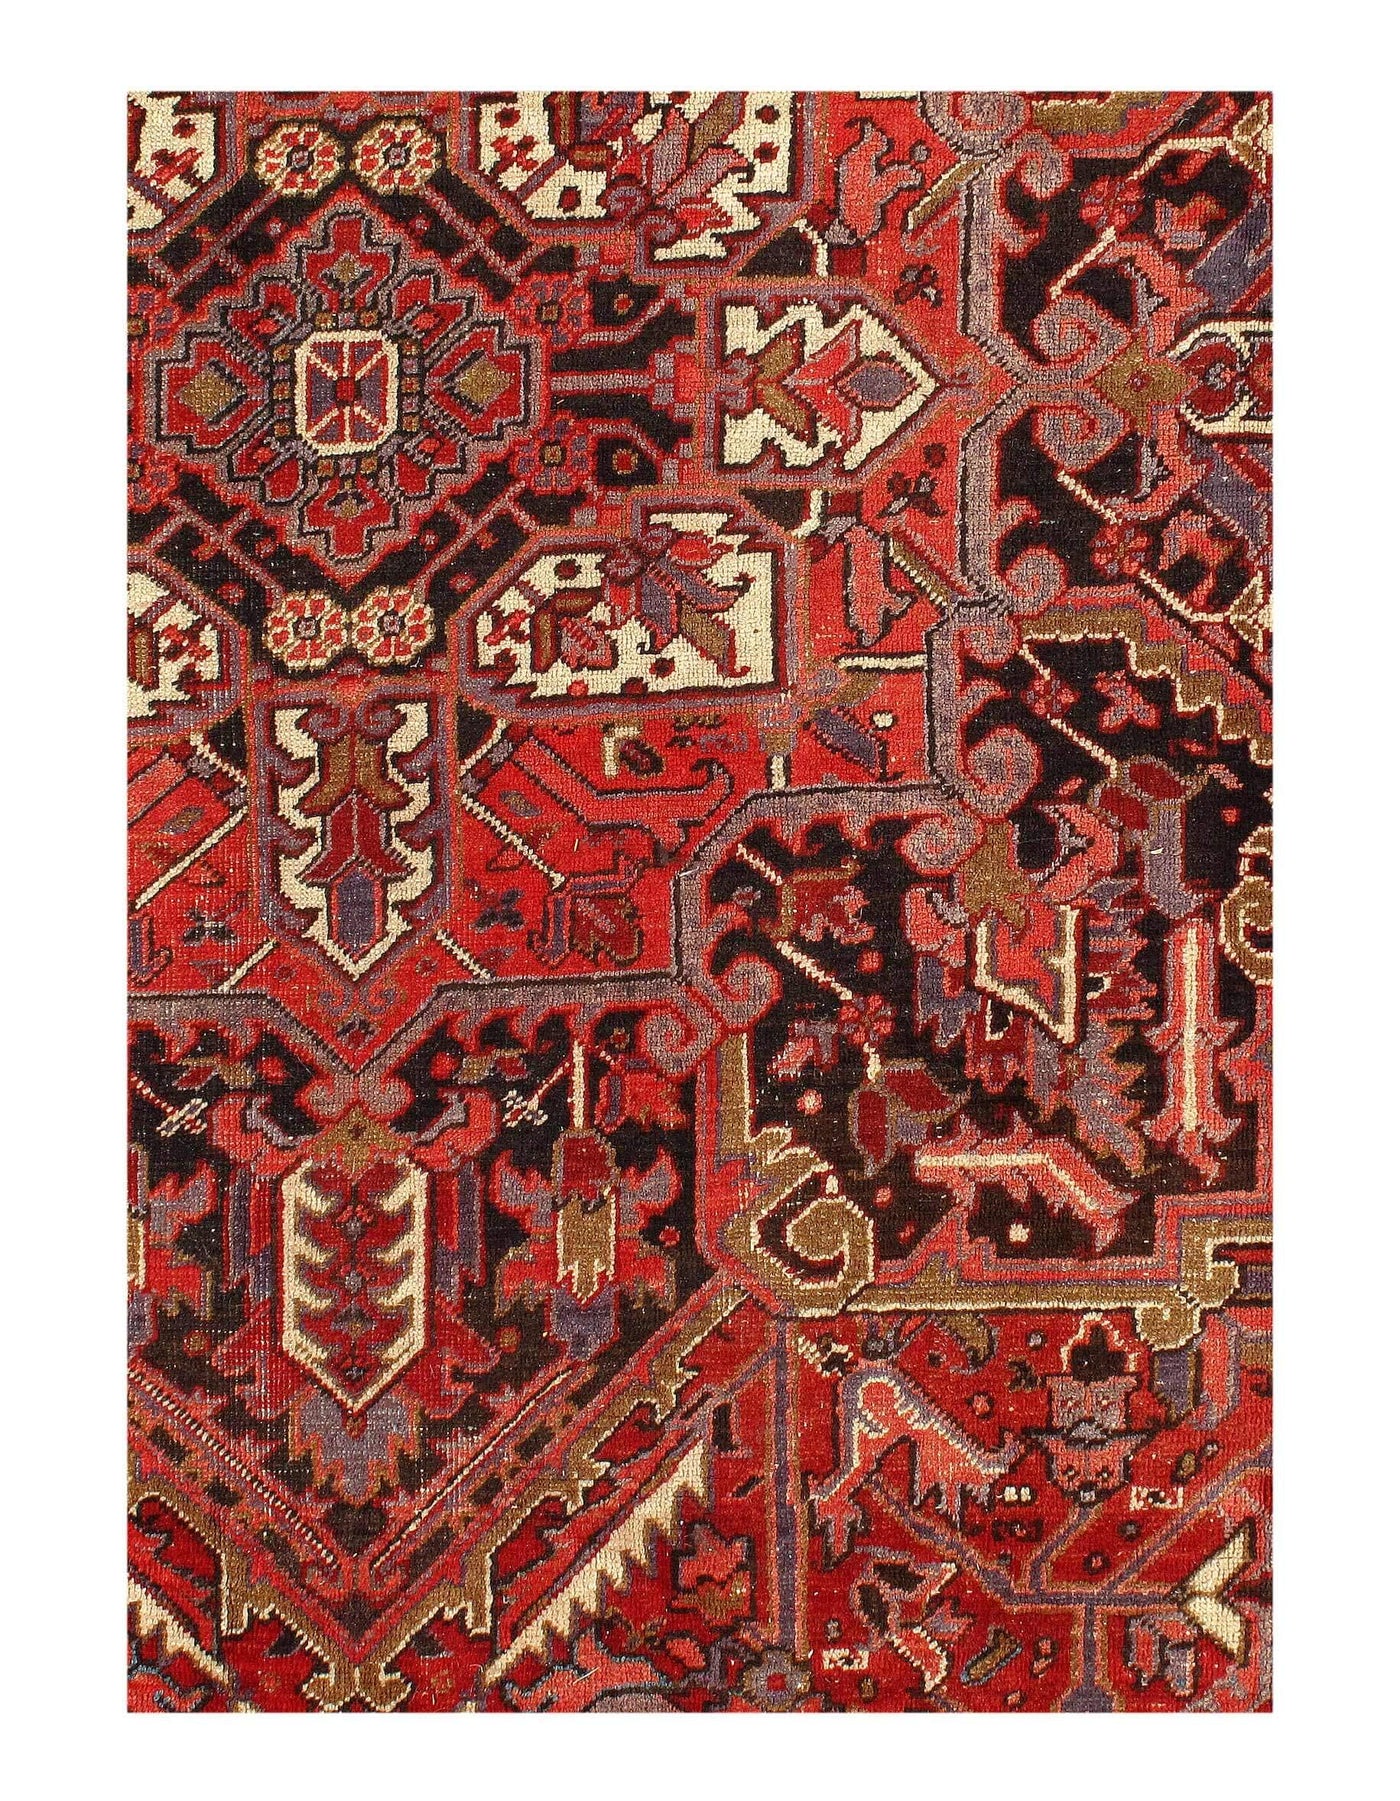 Canvello Antique Heriz Red Rugs For Living Room - 9'8'' X 12'11''